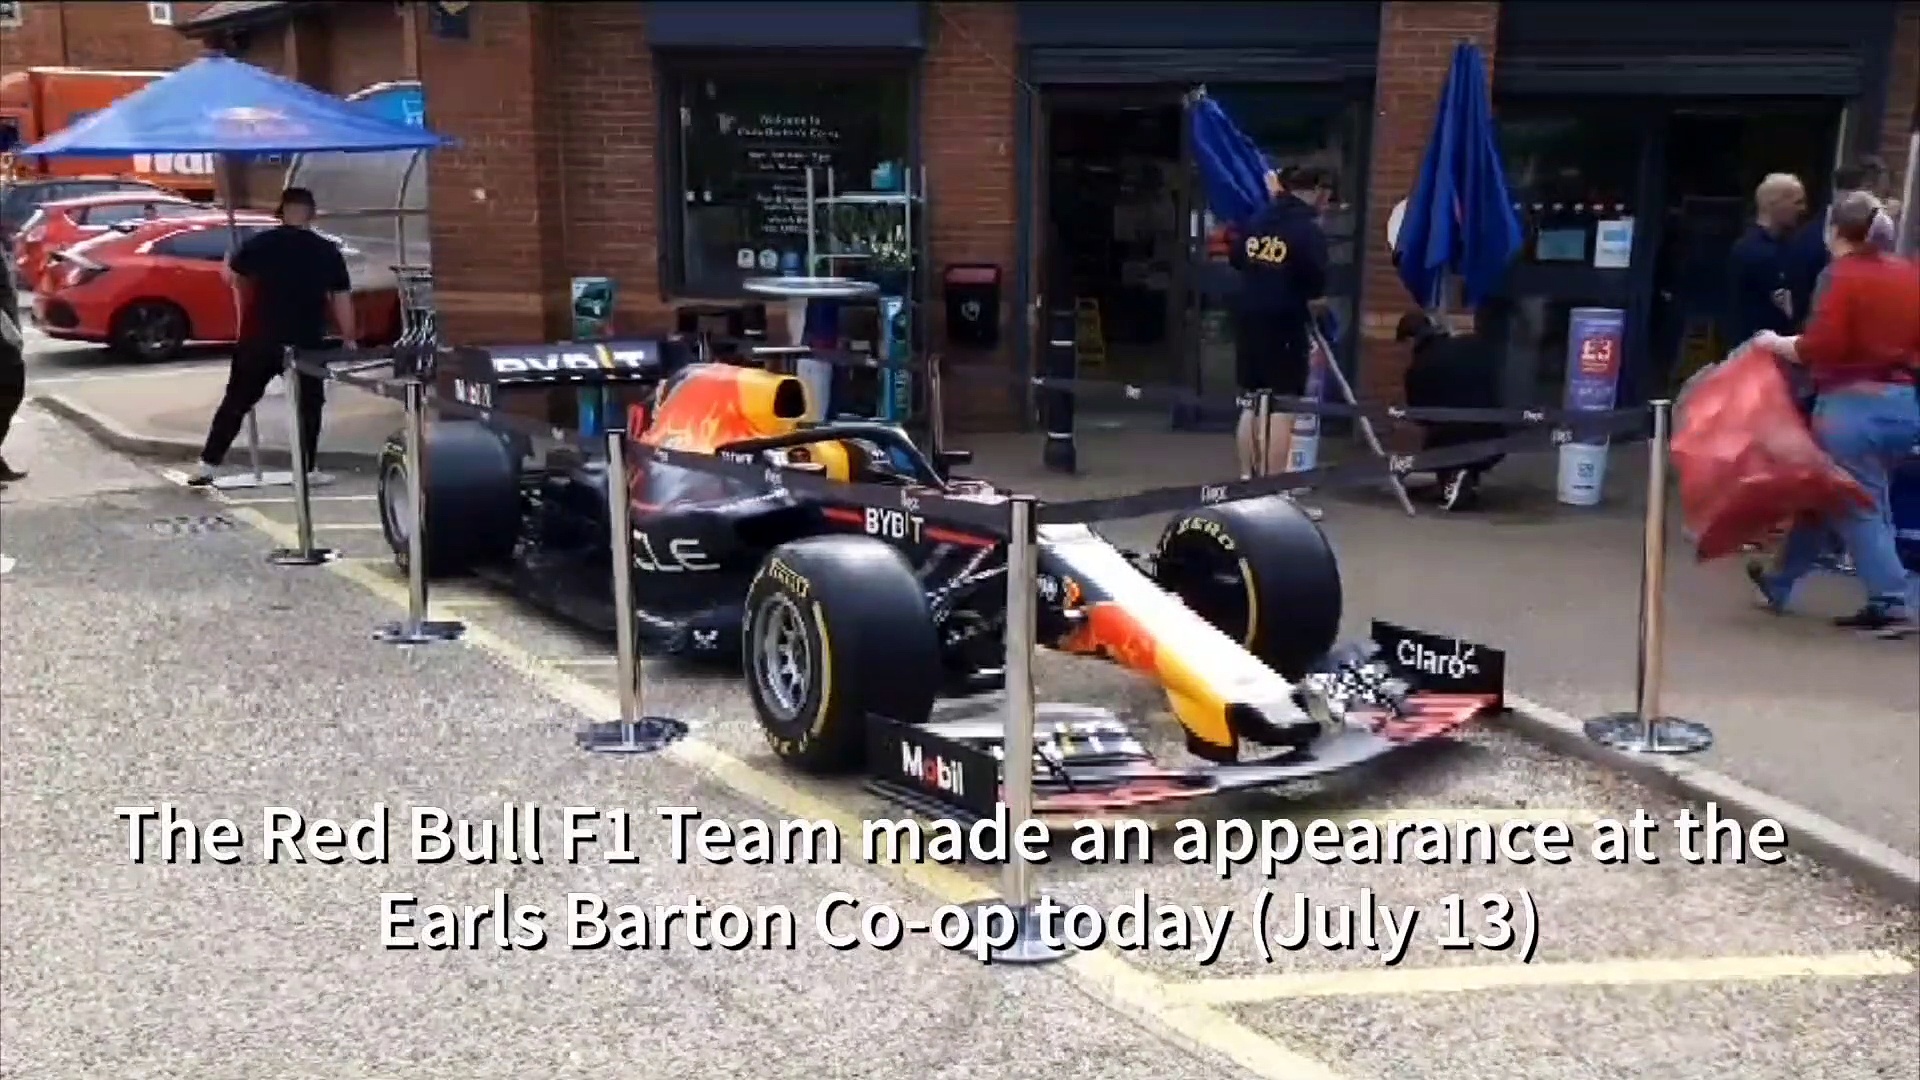 Red F1 Team celebrates Silverstone win with quick visit to Earls Barton Co-op | Northamptonshire Telegraph